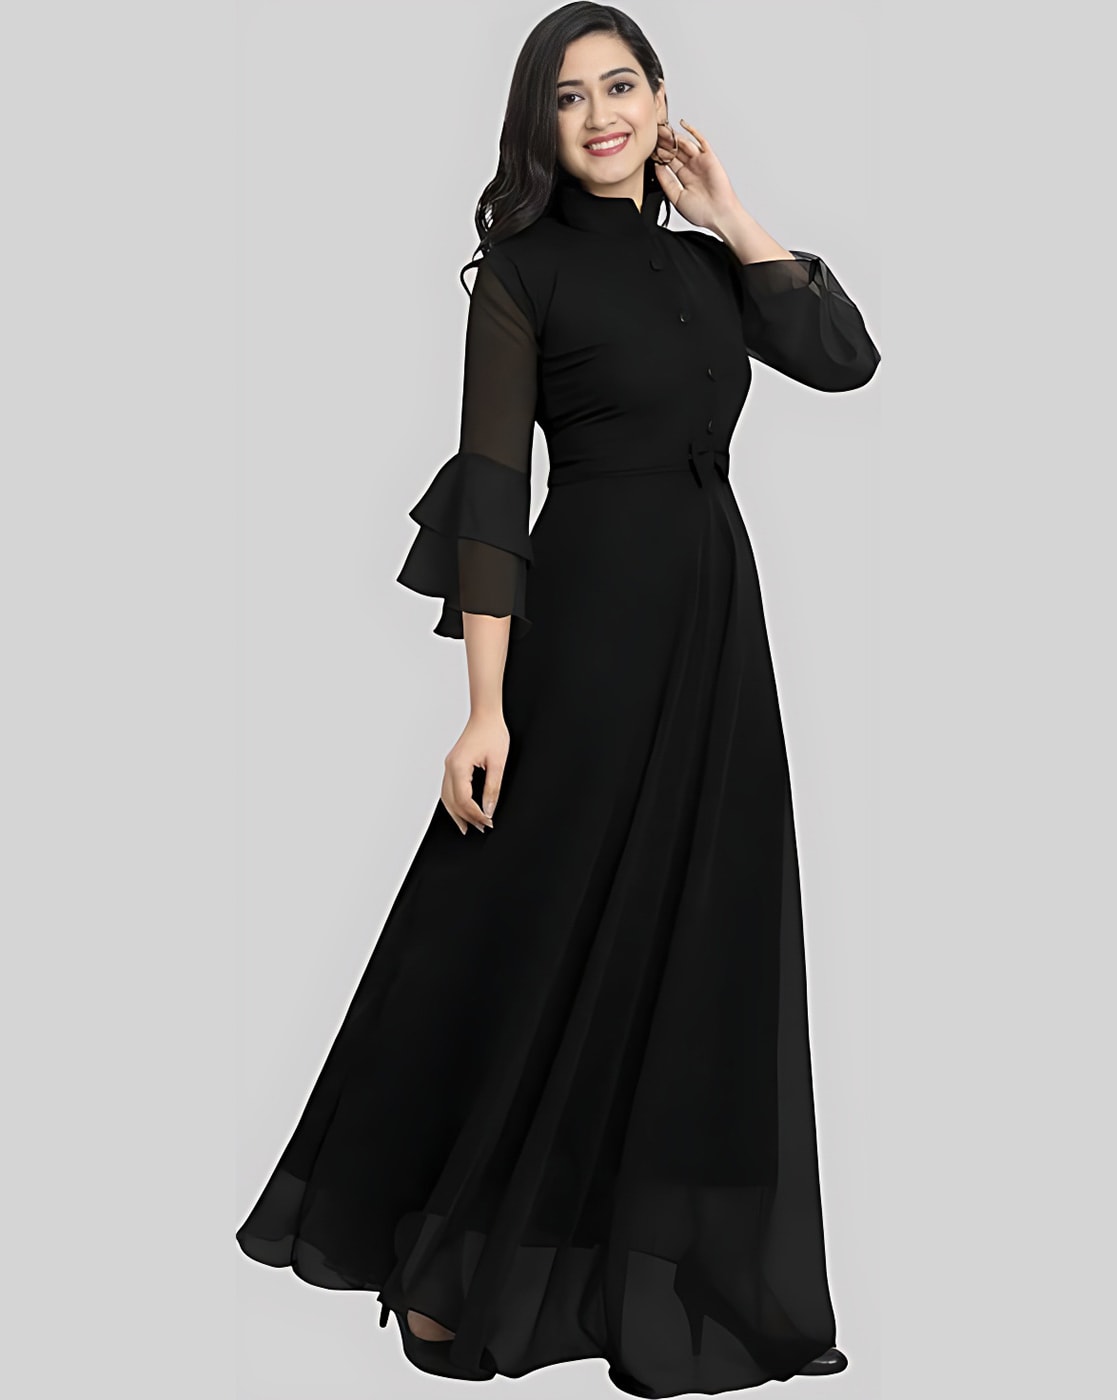 Ladies Party Wear Gown at Rs 1199 | New Items in Surat | ID: 2852698379391